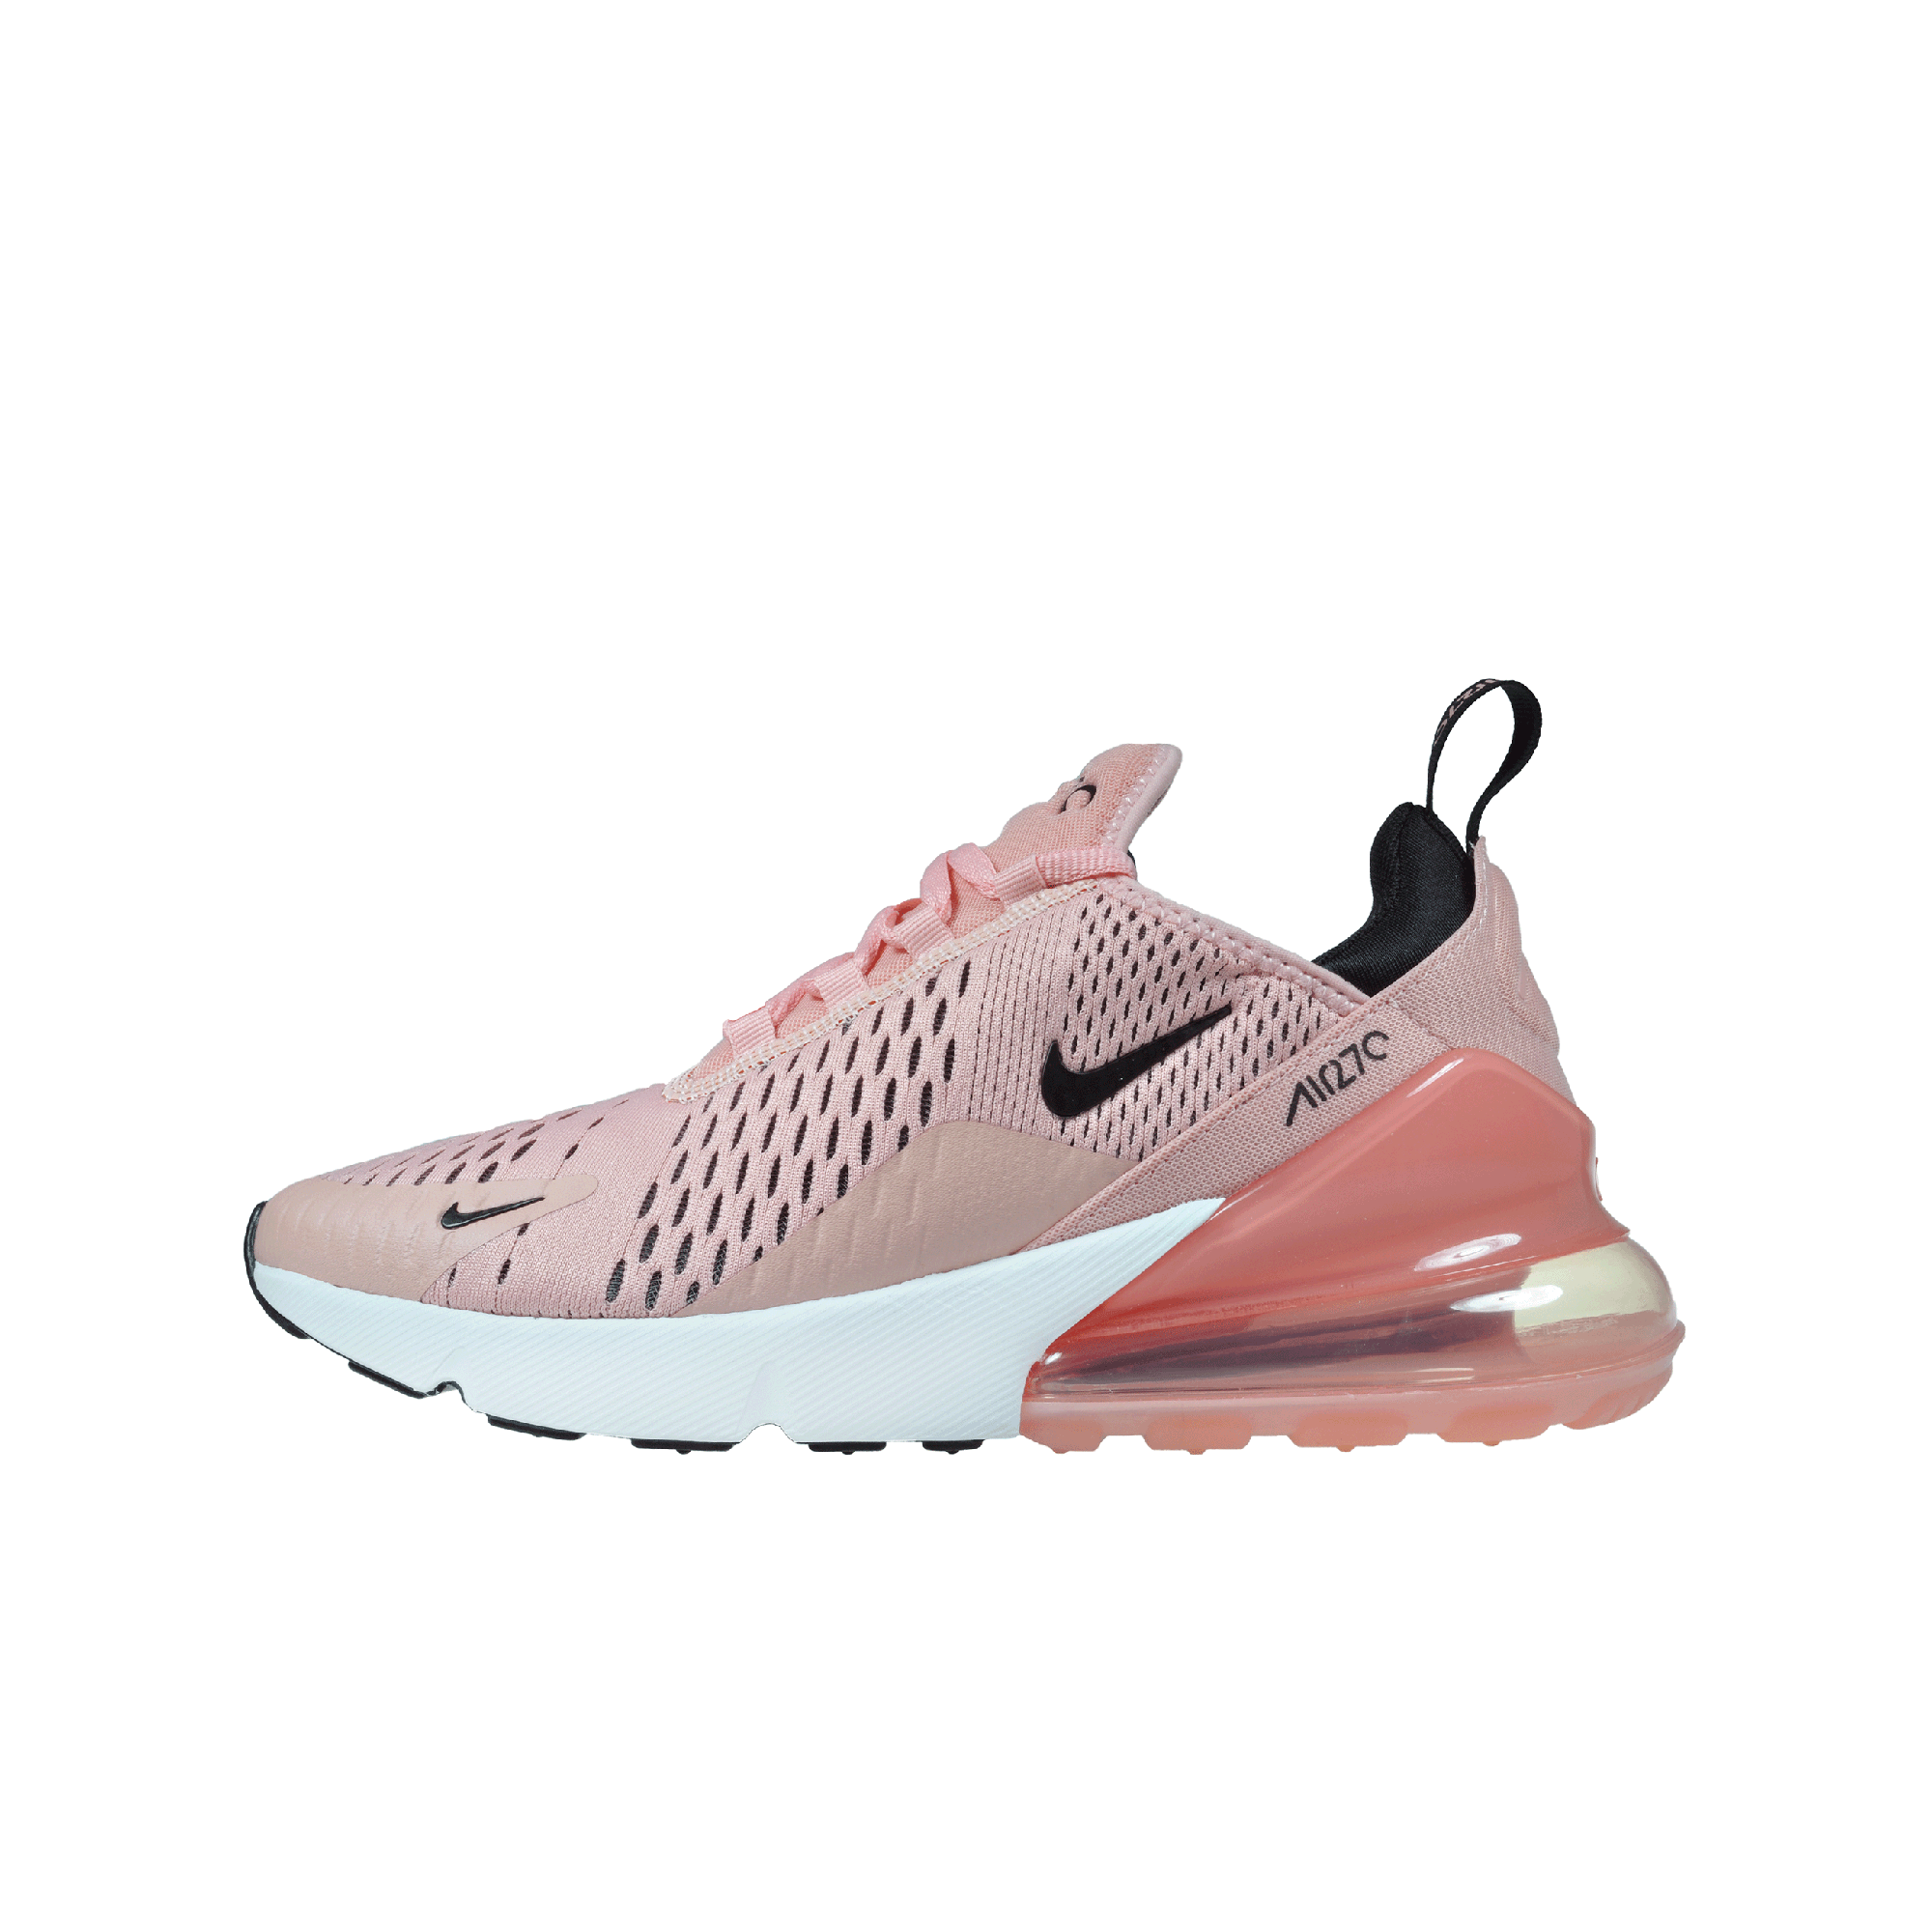 nike air max 270 coral stardust women's shoes